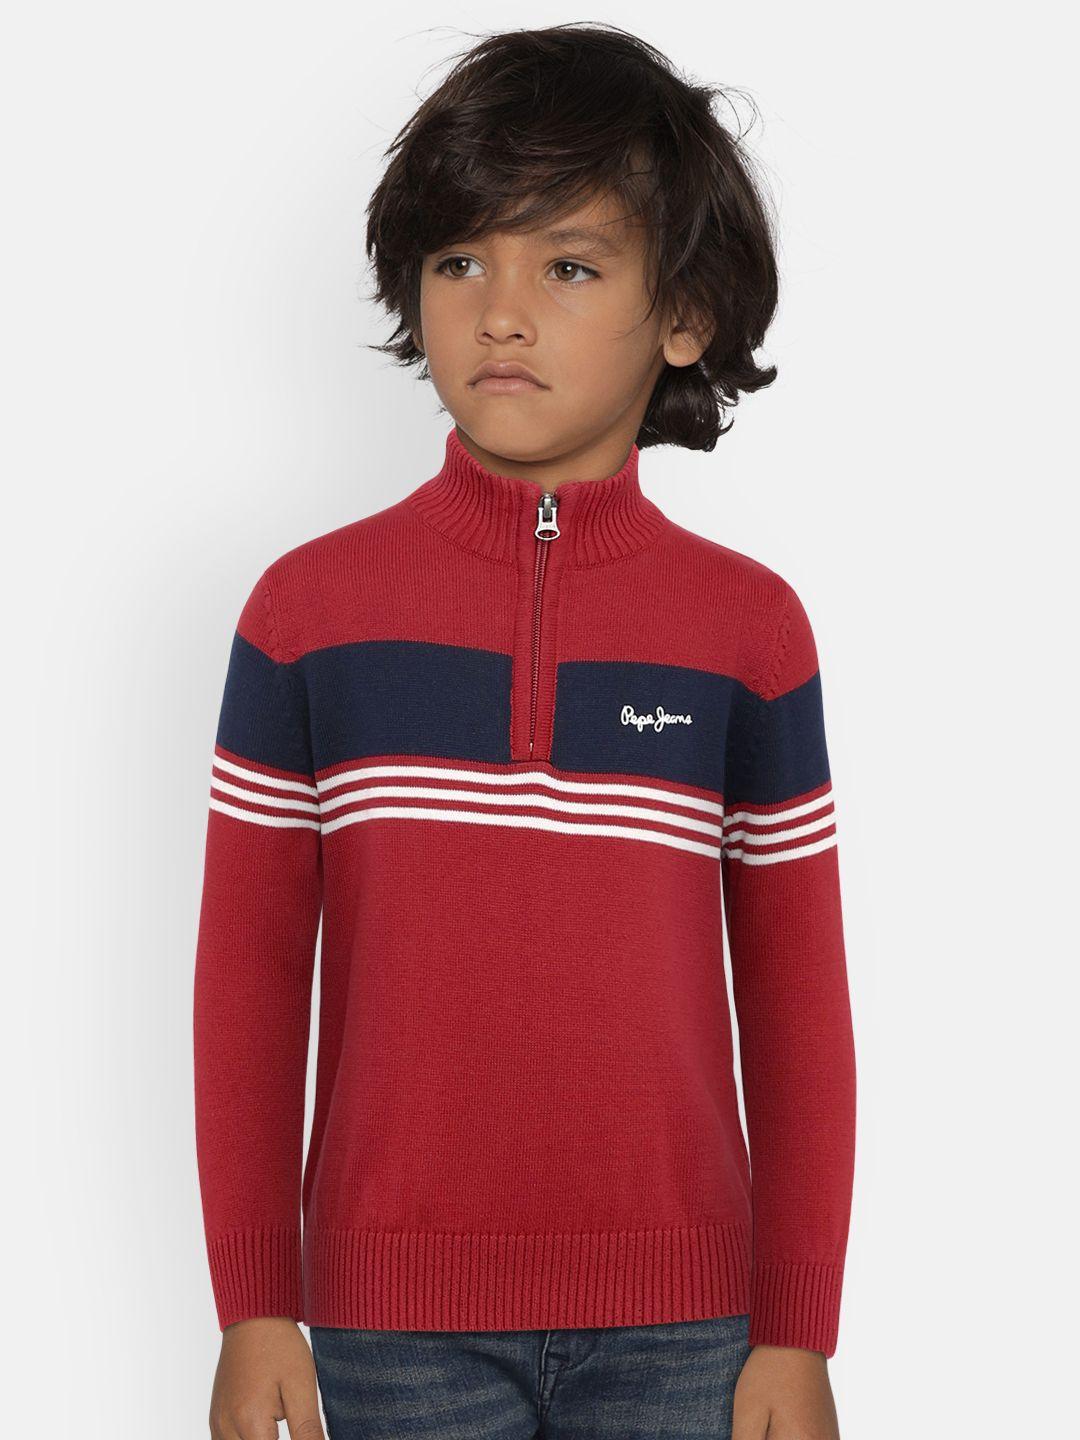 pepe-jeans-boys-red-&-navy-blue-placement-striped-pullover-sweater